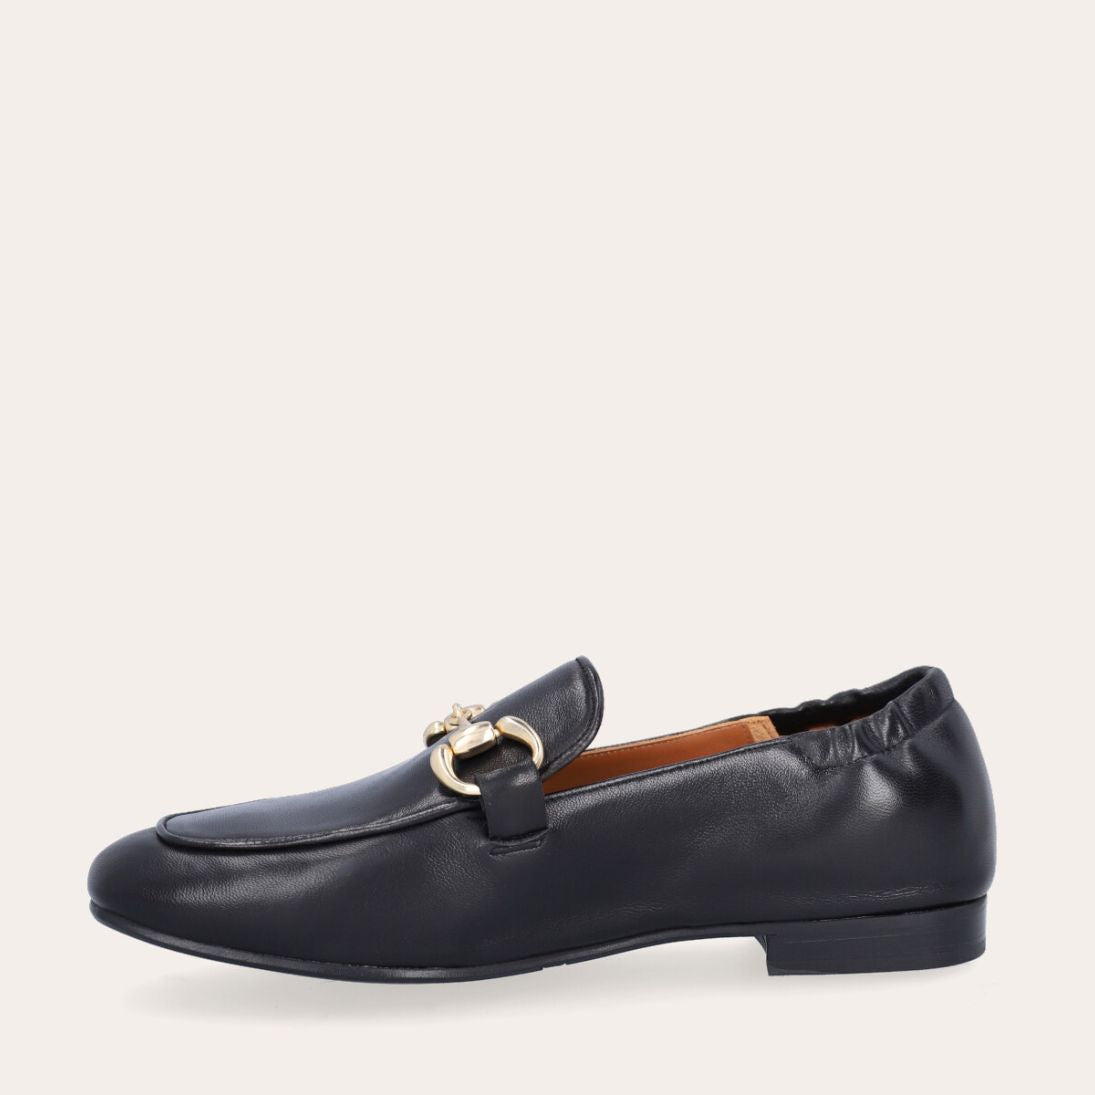 Classic Loafer in Nappa Leather Black/Gold